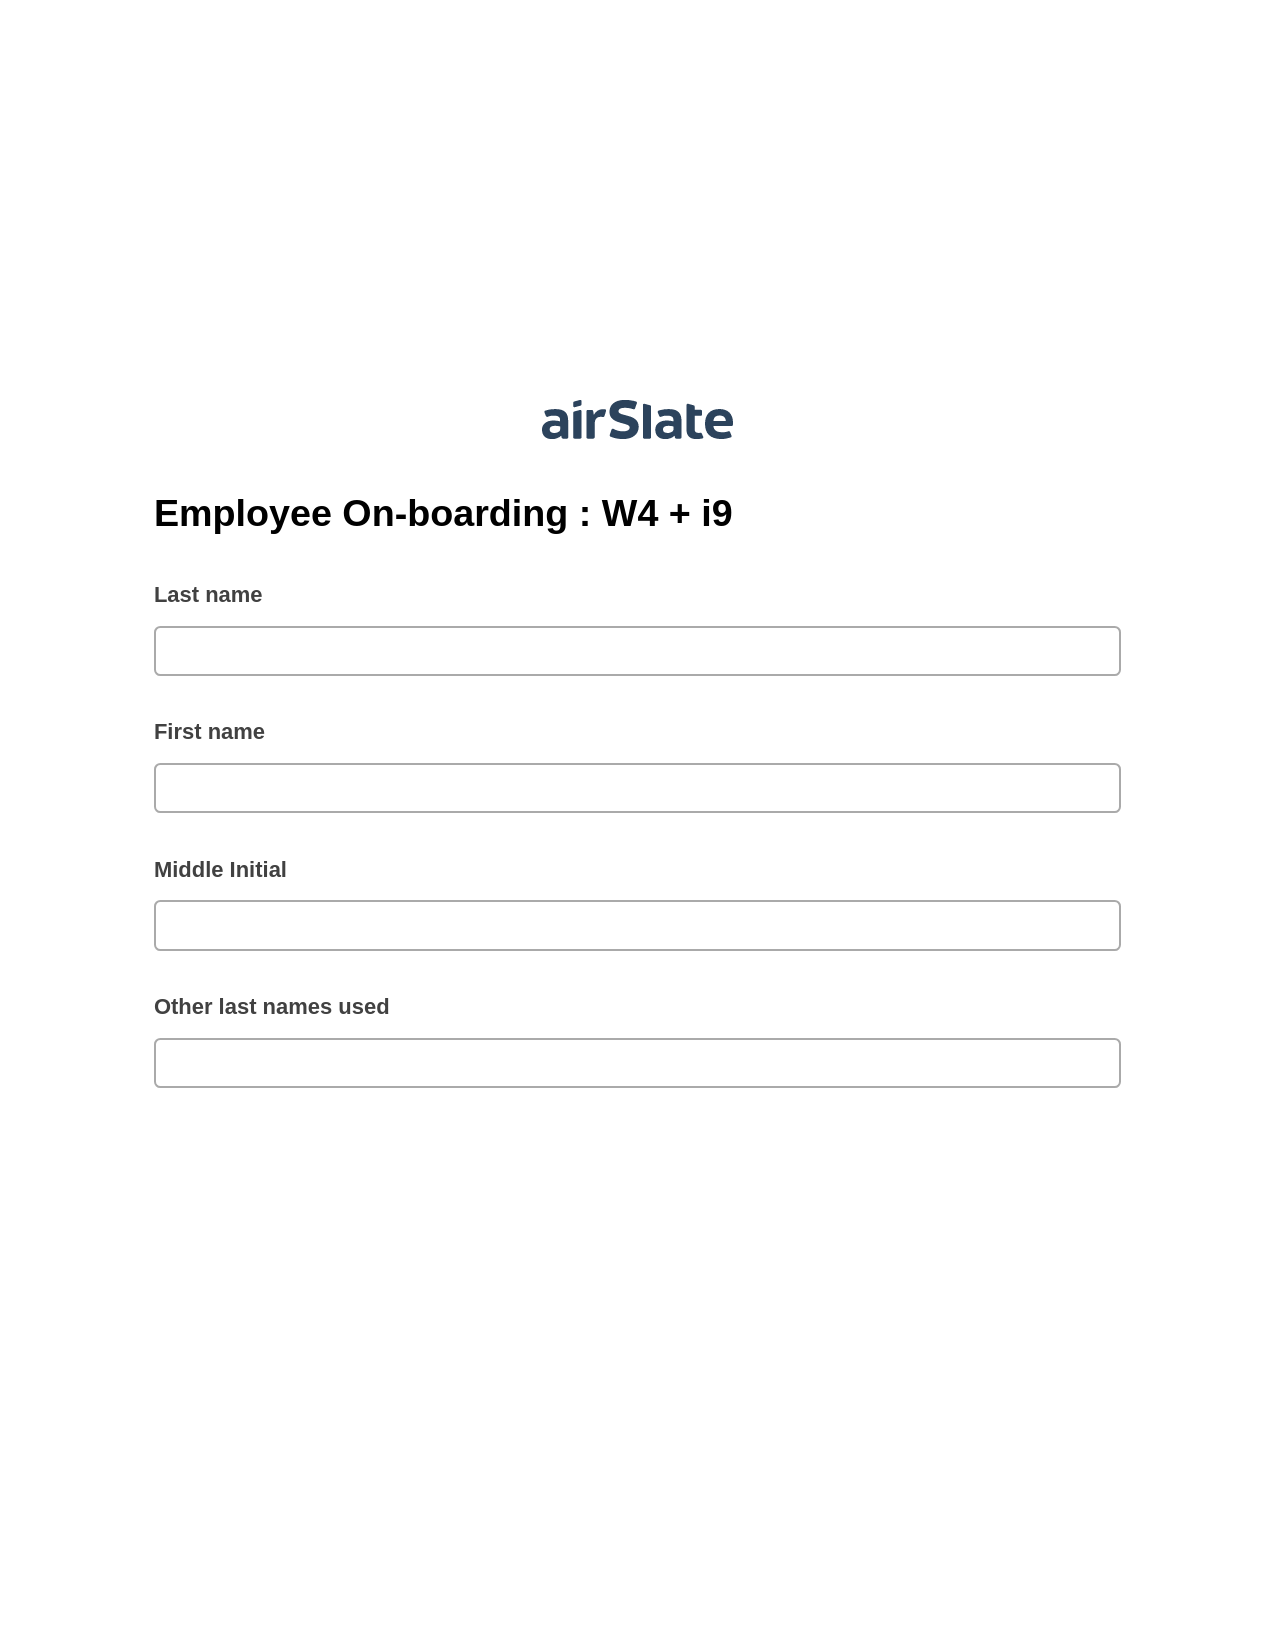 Employee On-boarding : W4 + i9 Pre-fill from Salesforce Records via SOQL Bot, SendGrid Send Campaign Bot, Export to Google Sheet Bot